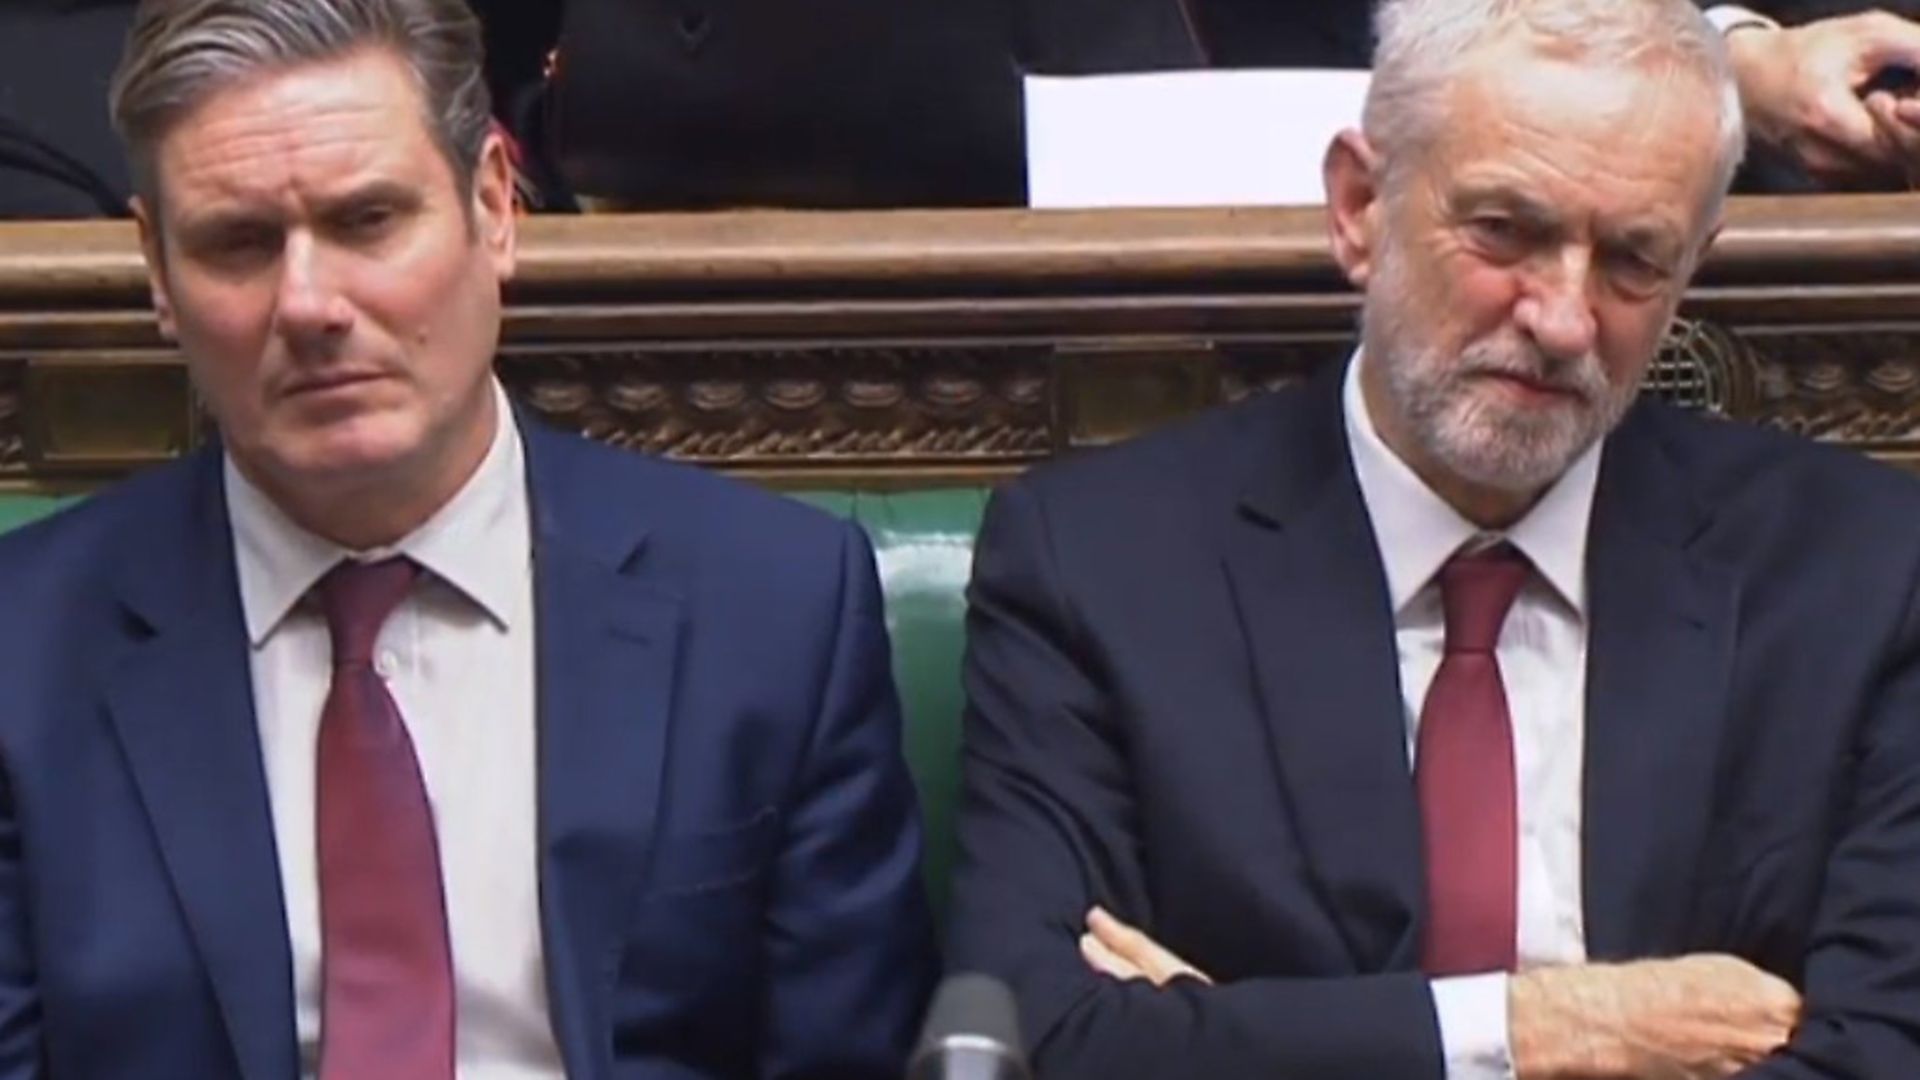 Shadow Secretary of State for Exiting the European Union Keir Starmer and Labour Leader Jeremy Corbyn. Photograph: PA Wire. - Credit: PA Wire/PA Images